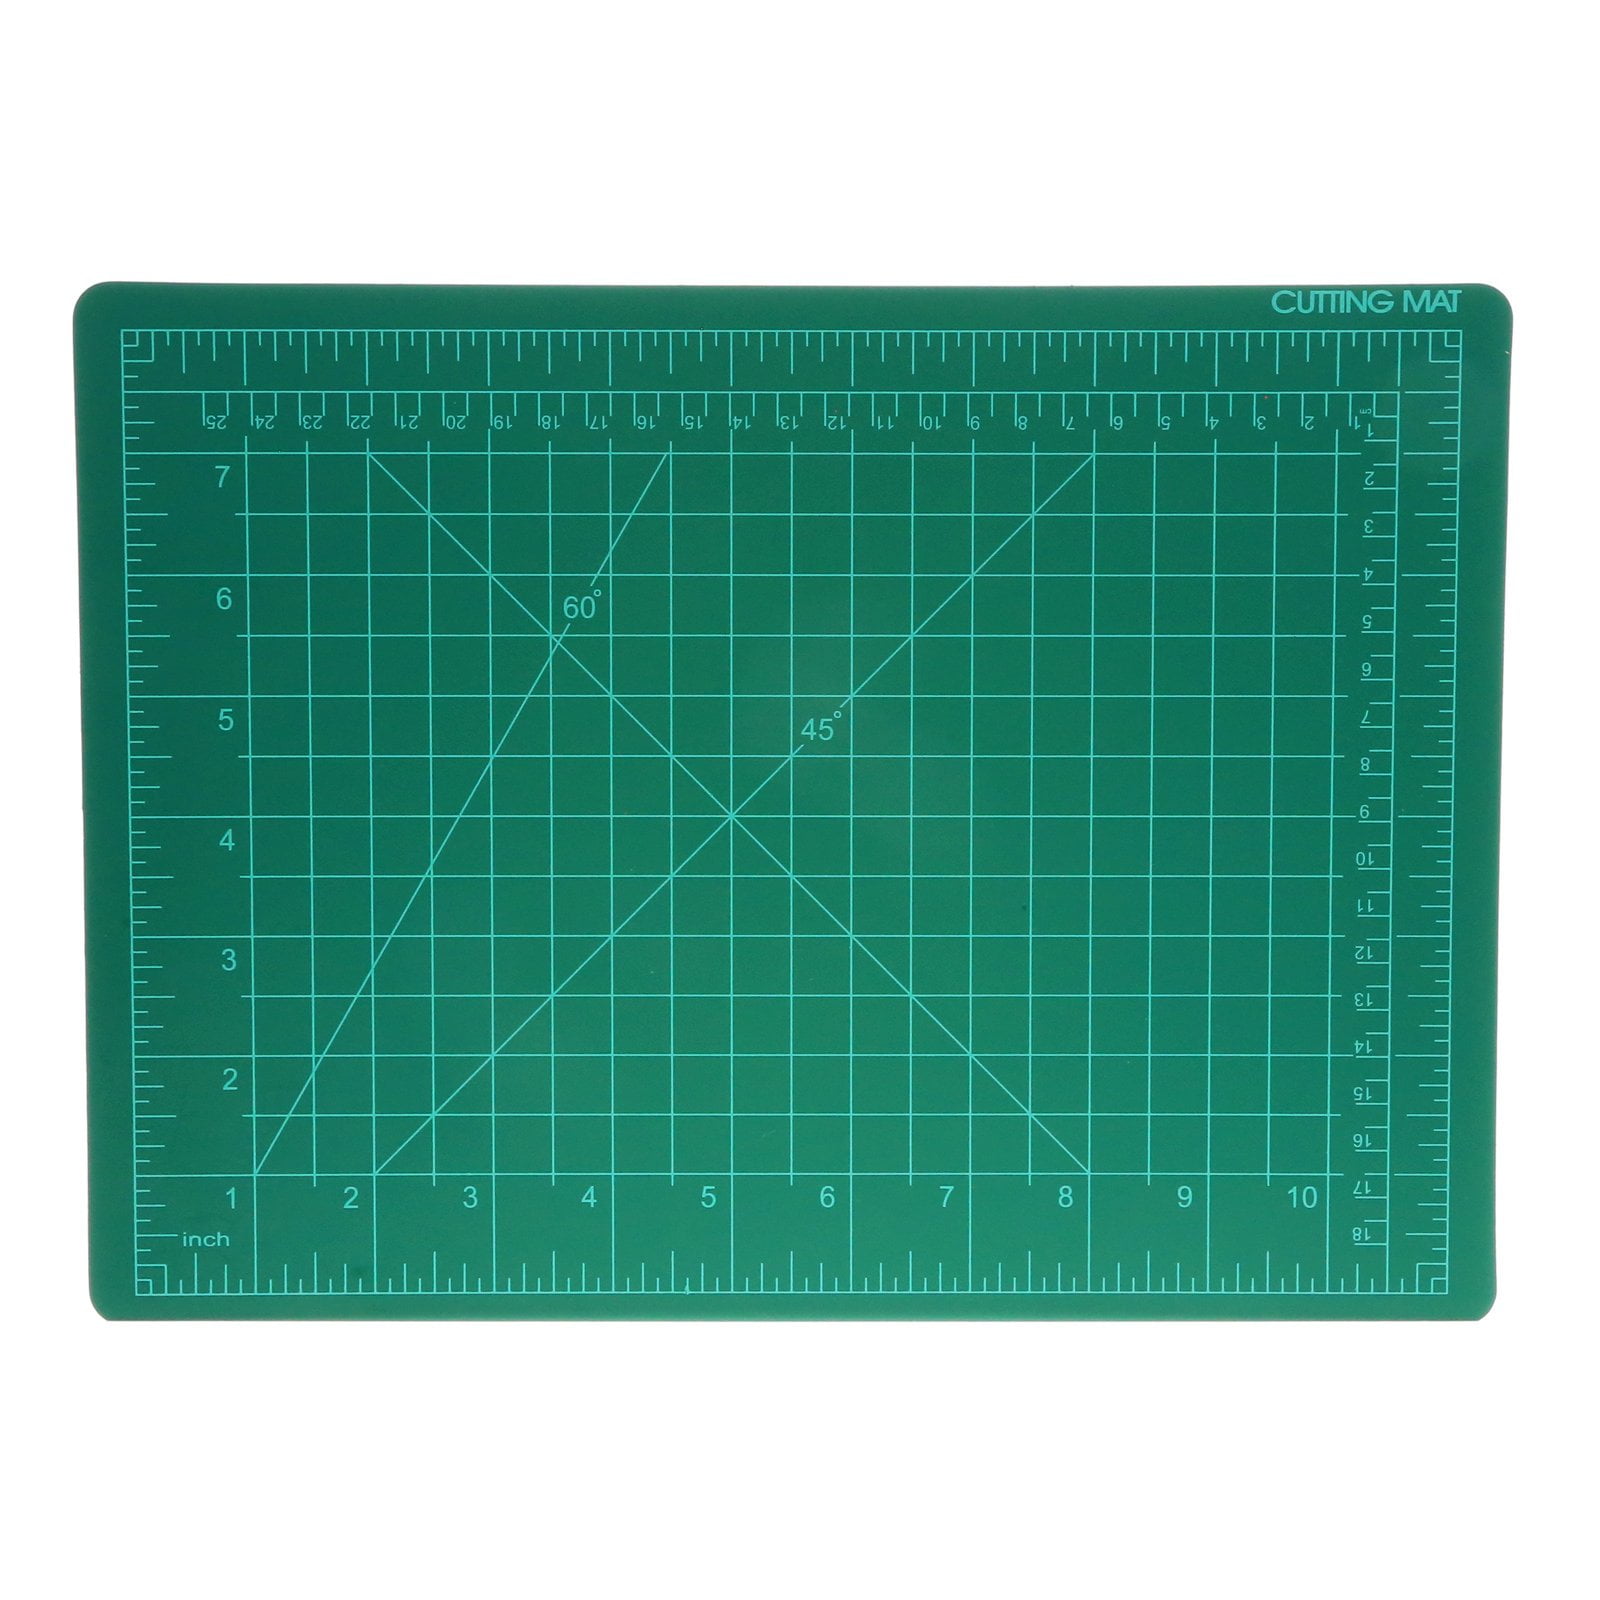 12 x 18 Inch Cutting Mats pad for Crafts,Self Healing Craft Cricut Rotary Sewing Board Hobby Measuring Cutting Mat,Quilting Small Crafting Rotary Flexible Cutting Board Mats Green, A3 